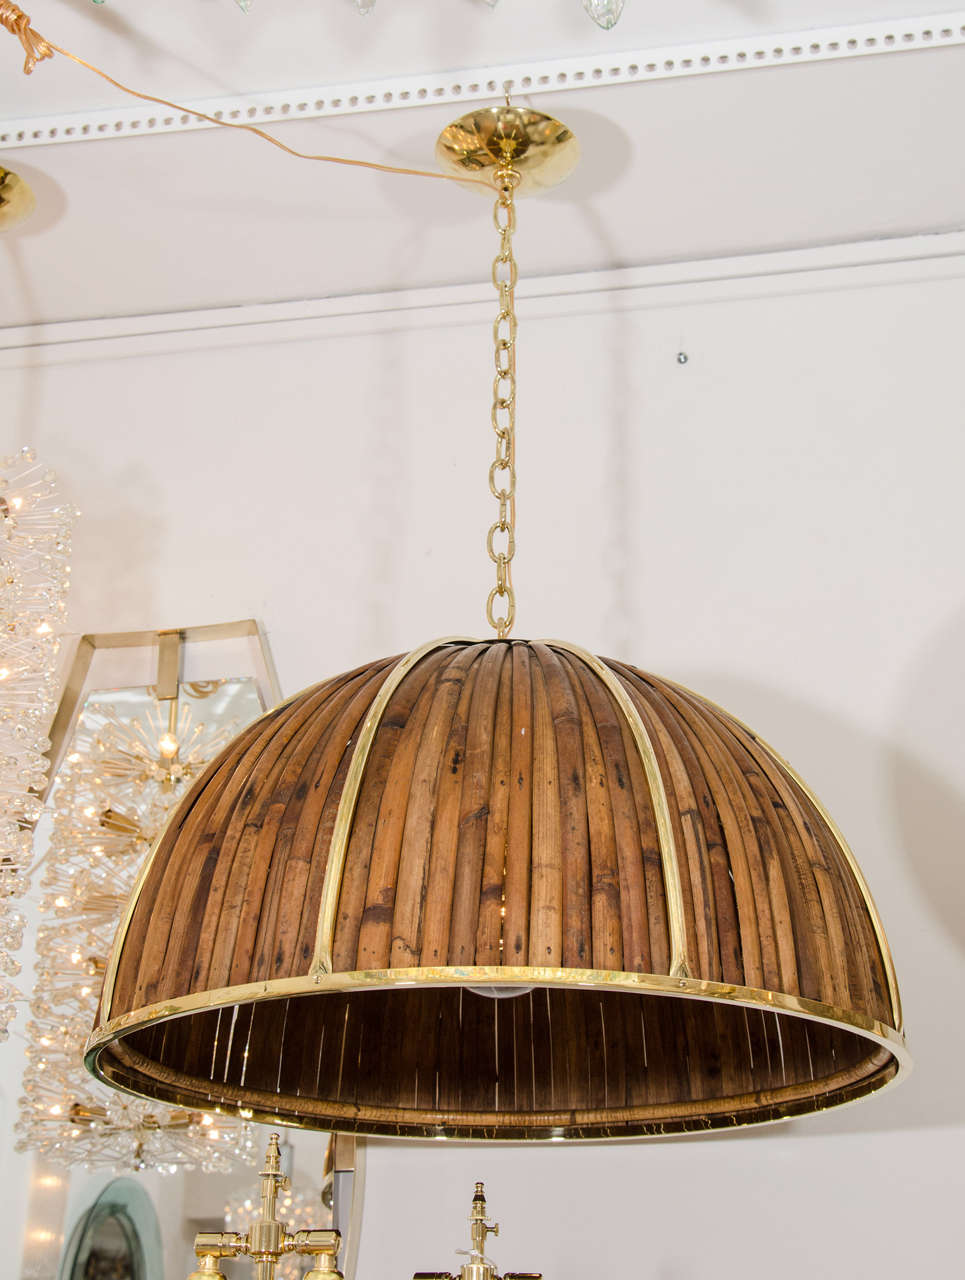 Bamboo and brass dome form pendant fixture by Gabriella Crespi from the 'Rising Sun' collection. Signed.